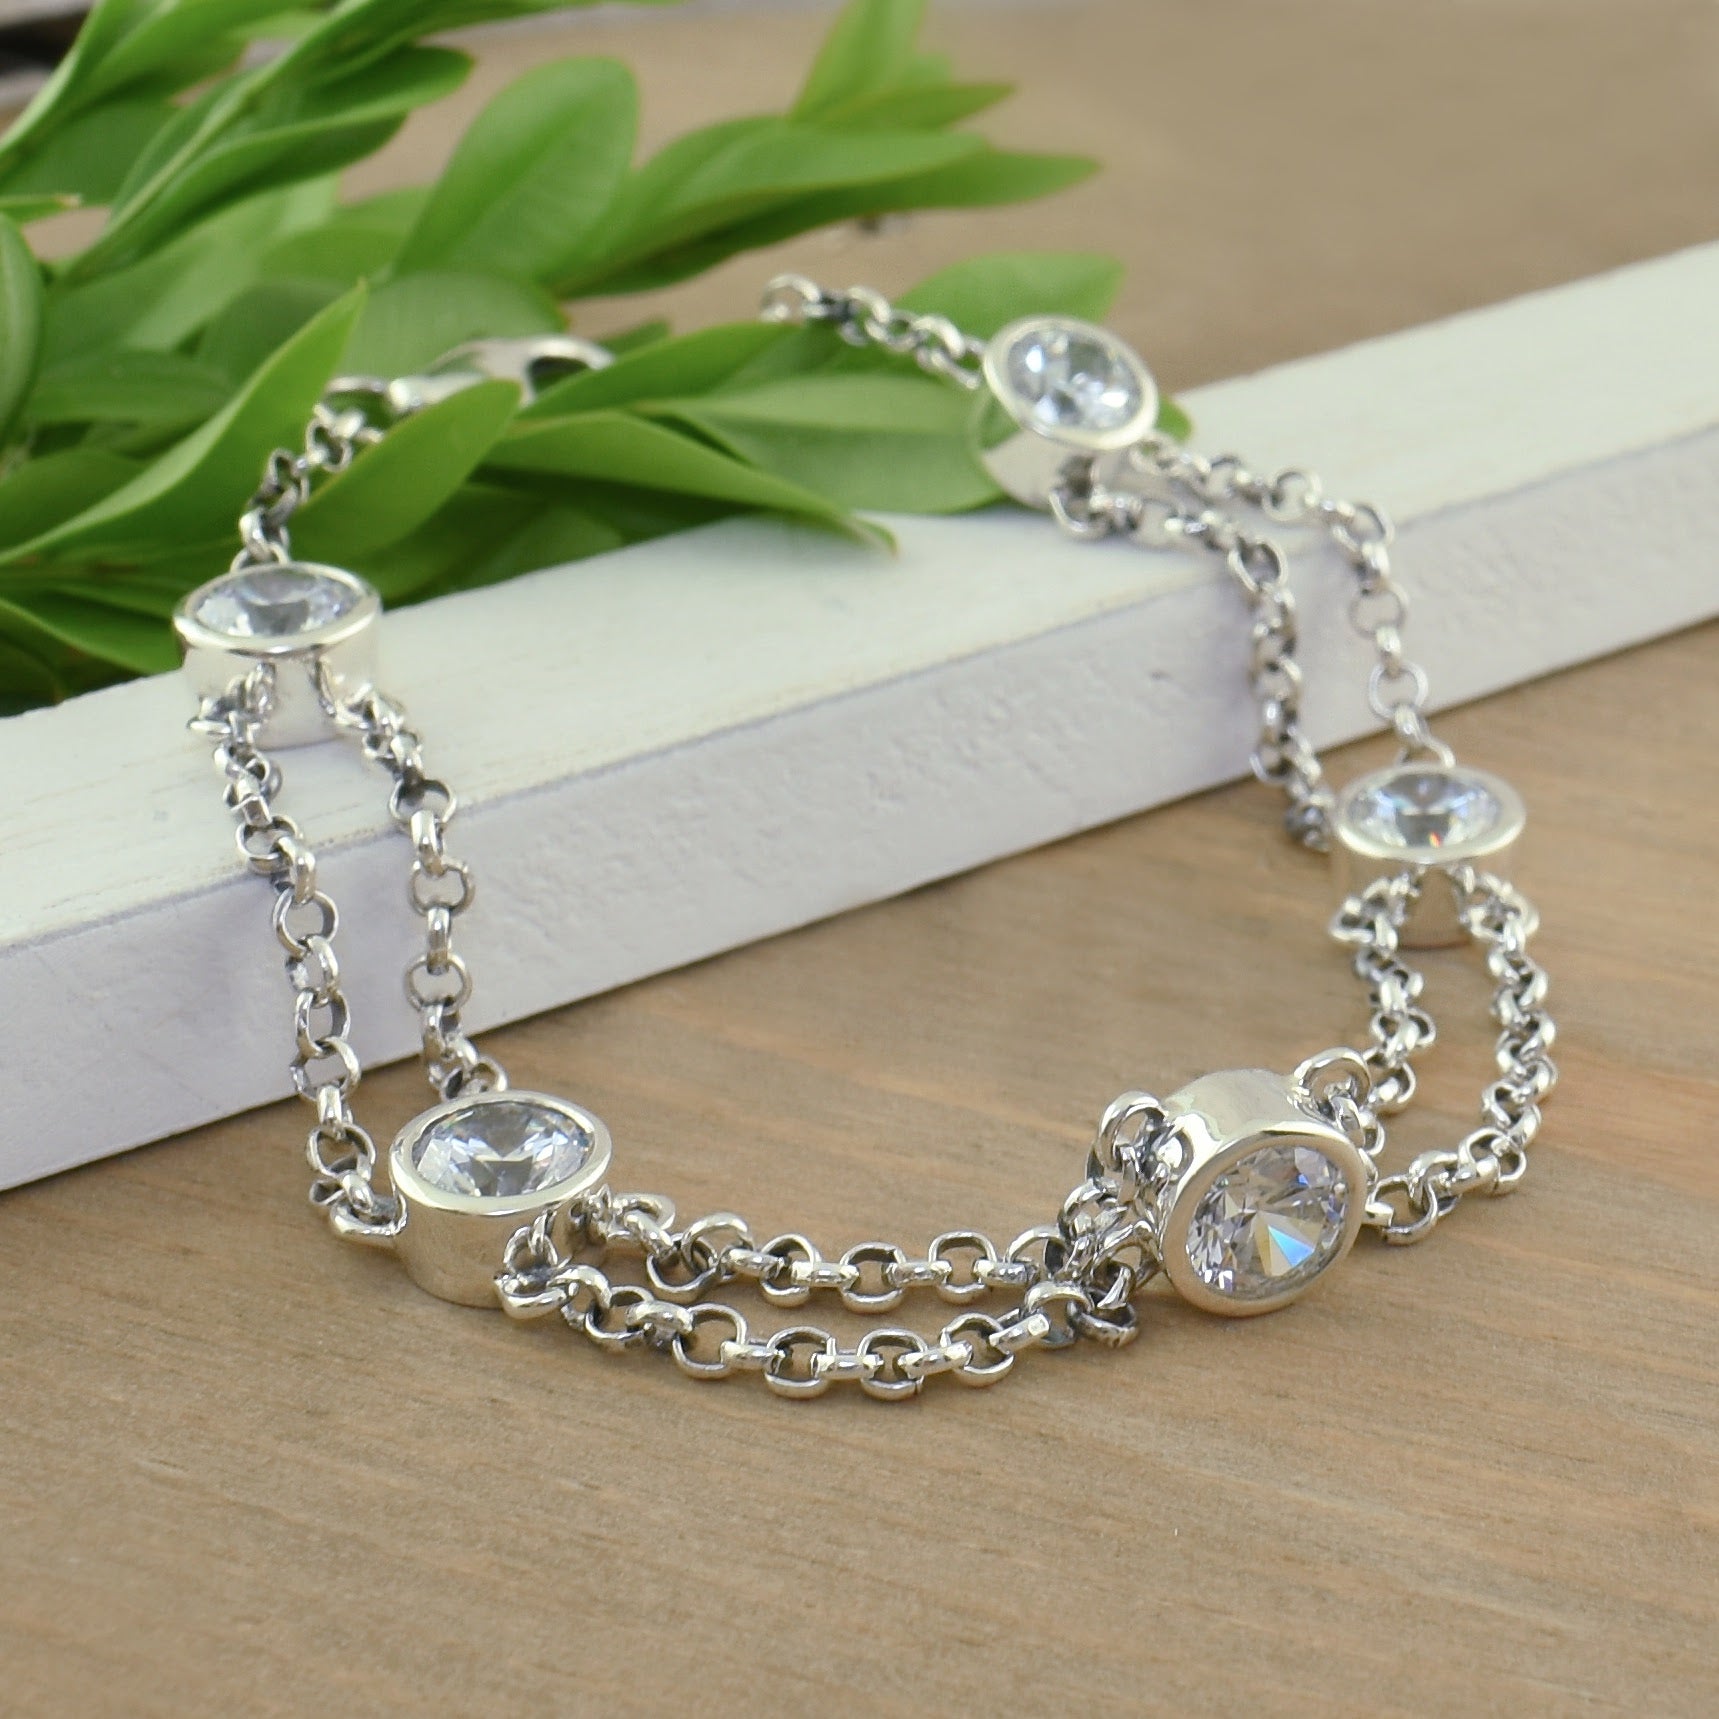 .925 sterling silver and cz double chain bracelet